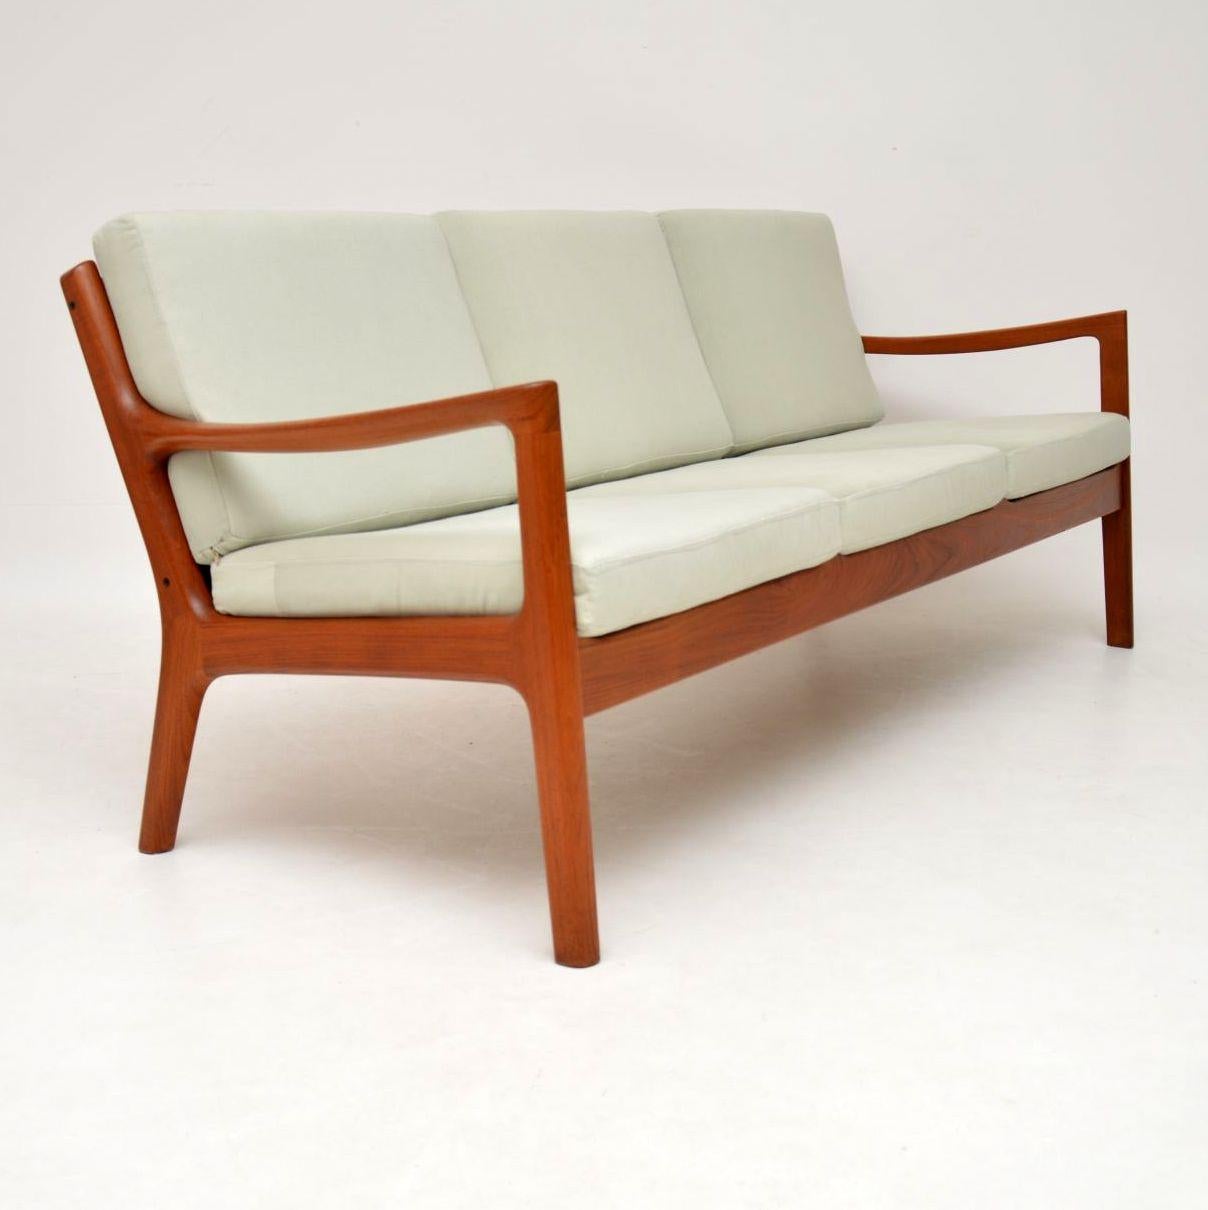 A stunning Danish sofa in solid teak, this model is called the ‘Senator’, it was designed by Ole Wanscher and was made by Cado in the 1960s-1970s. It’s in excellent condition for it’s age, the teak frame is clean, sturdy and sound, with only some